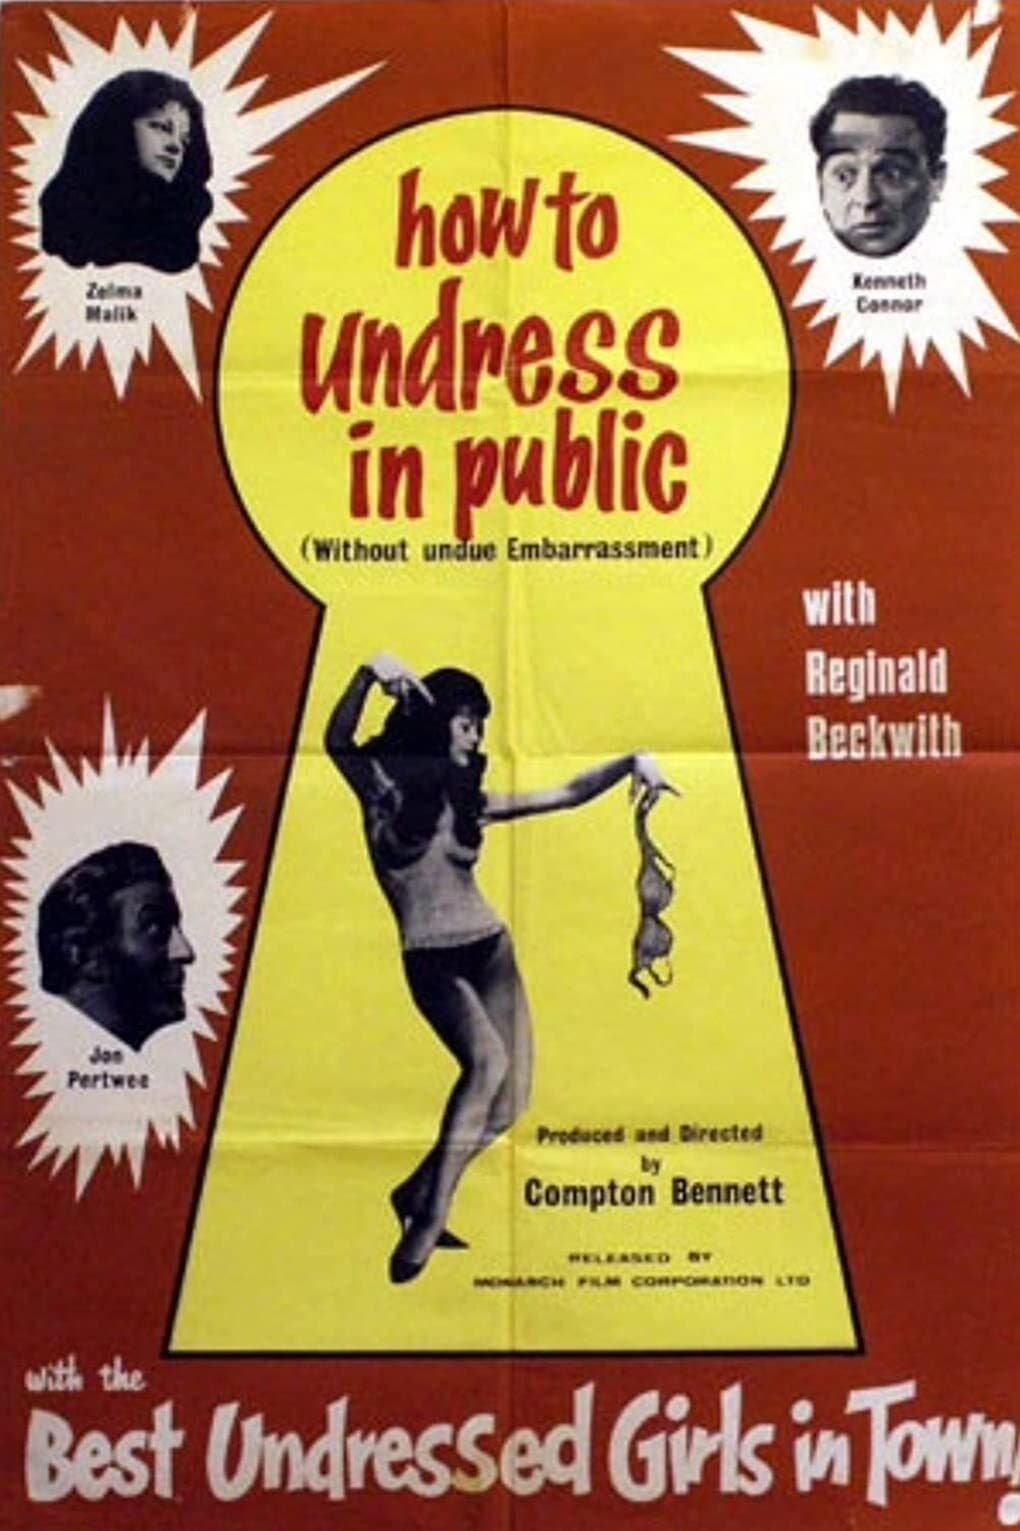 How to Undress in Public Without Undue Embarrassment (1965)